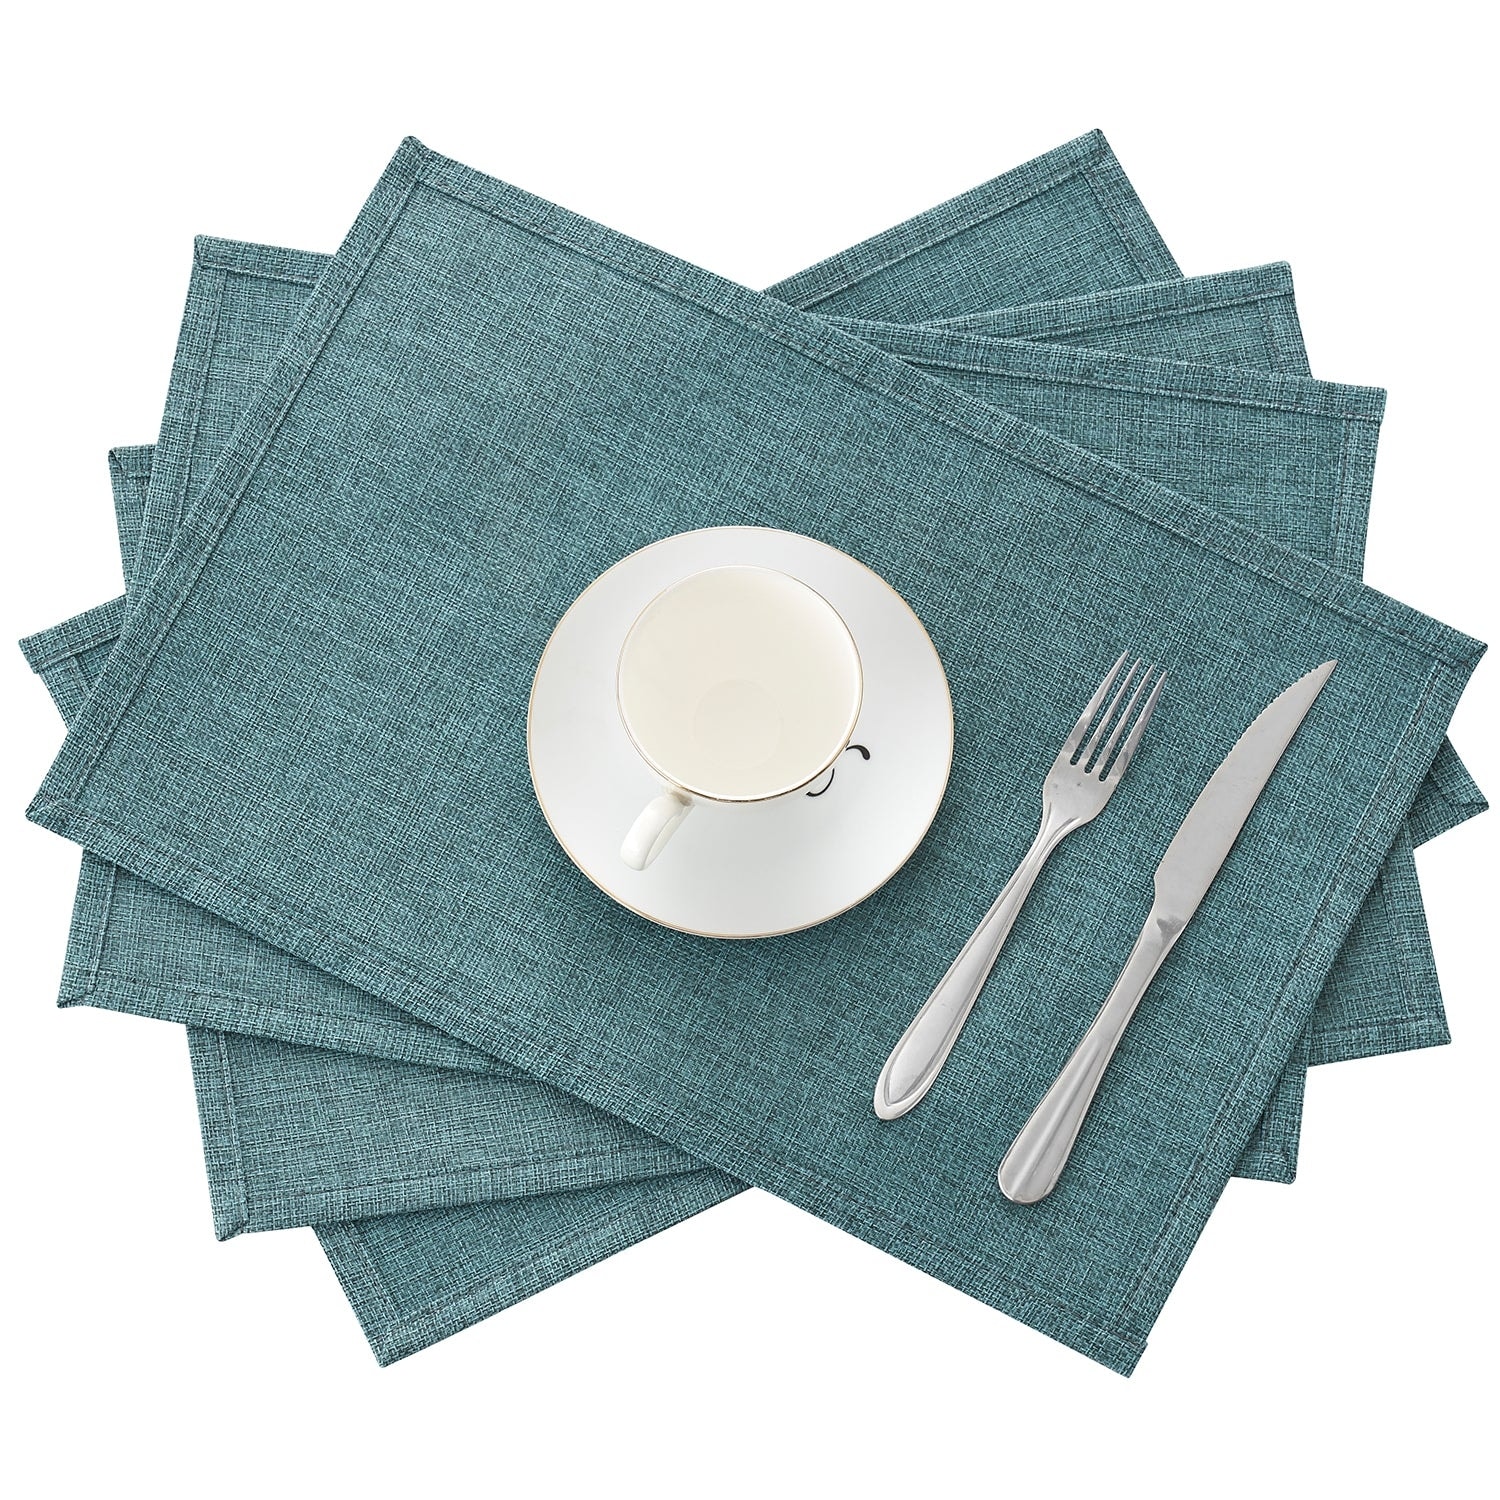 https://ak1.ostkcdn.com/images/products/is/images/direct/d5be8b736397ac425bcd7dfe010dc3bc63d6d54f/Linen-Placemats-Set-of-4%2C-Heat-Resistant-Dining-Table-Place-Mats-%2C-Machine-Washable.jpg